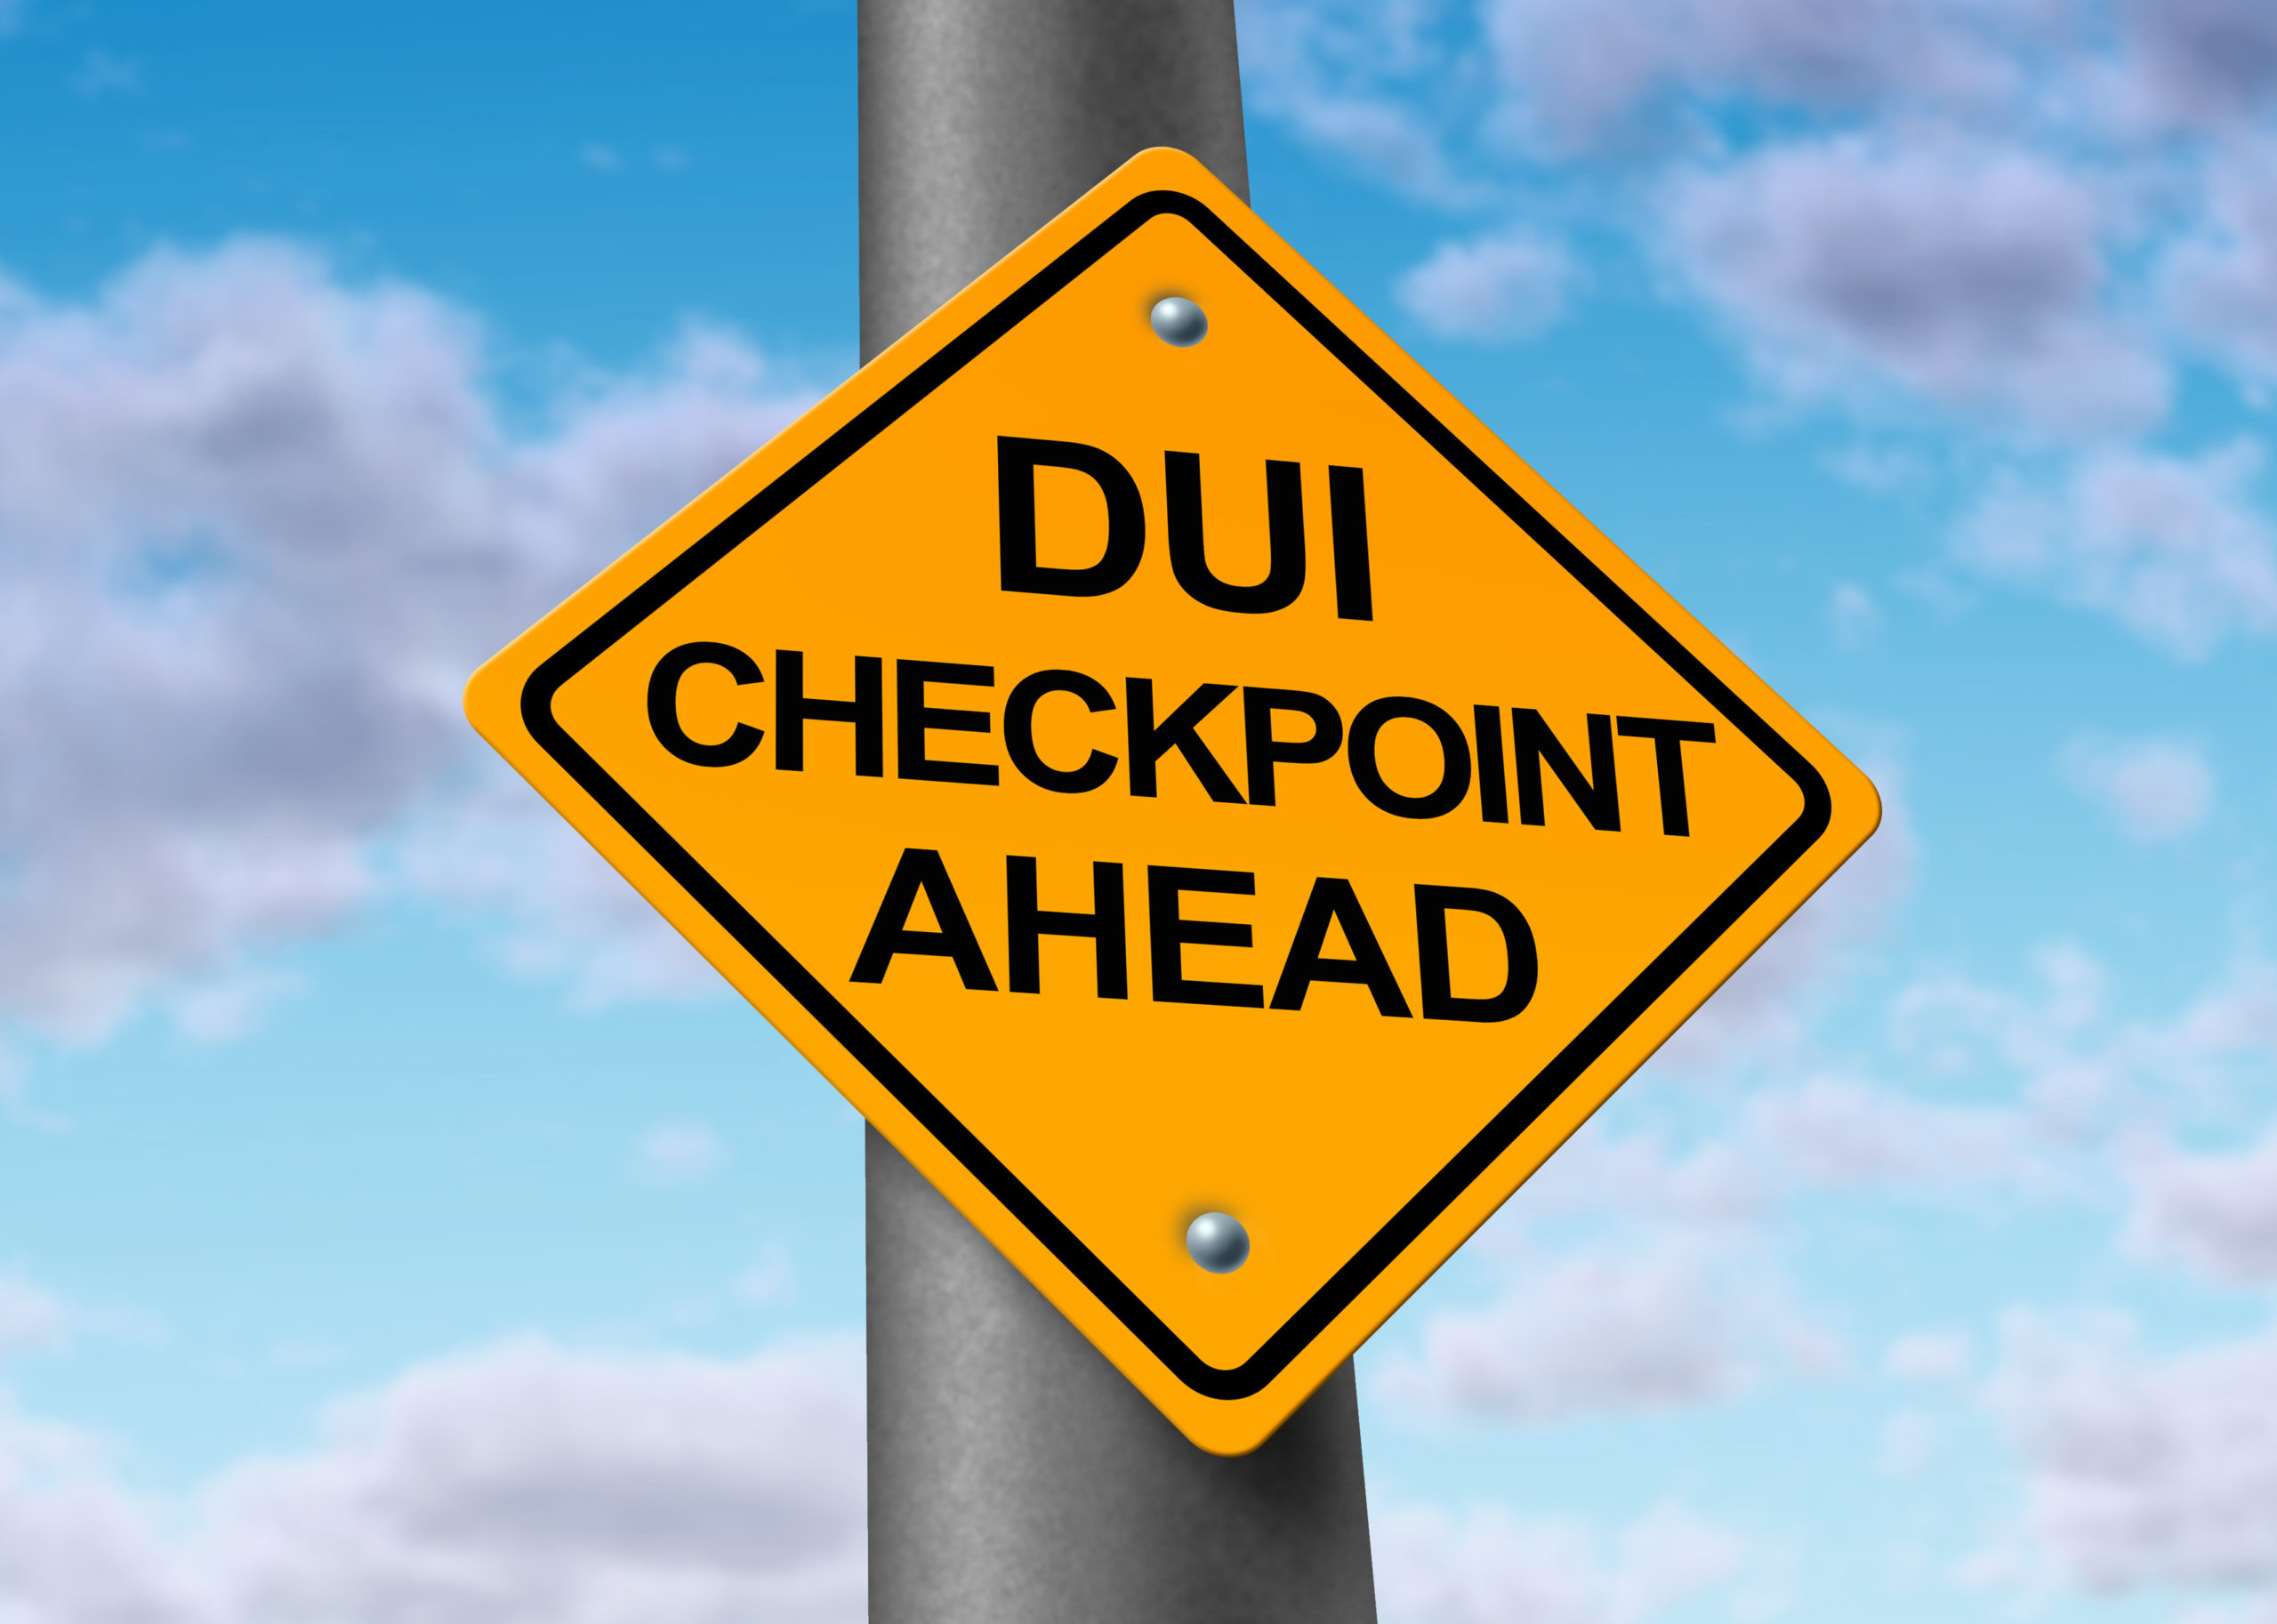 Is It Legal To Turn Around At A DUI Checkpoint?